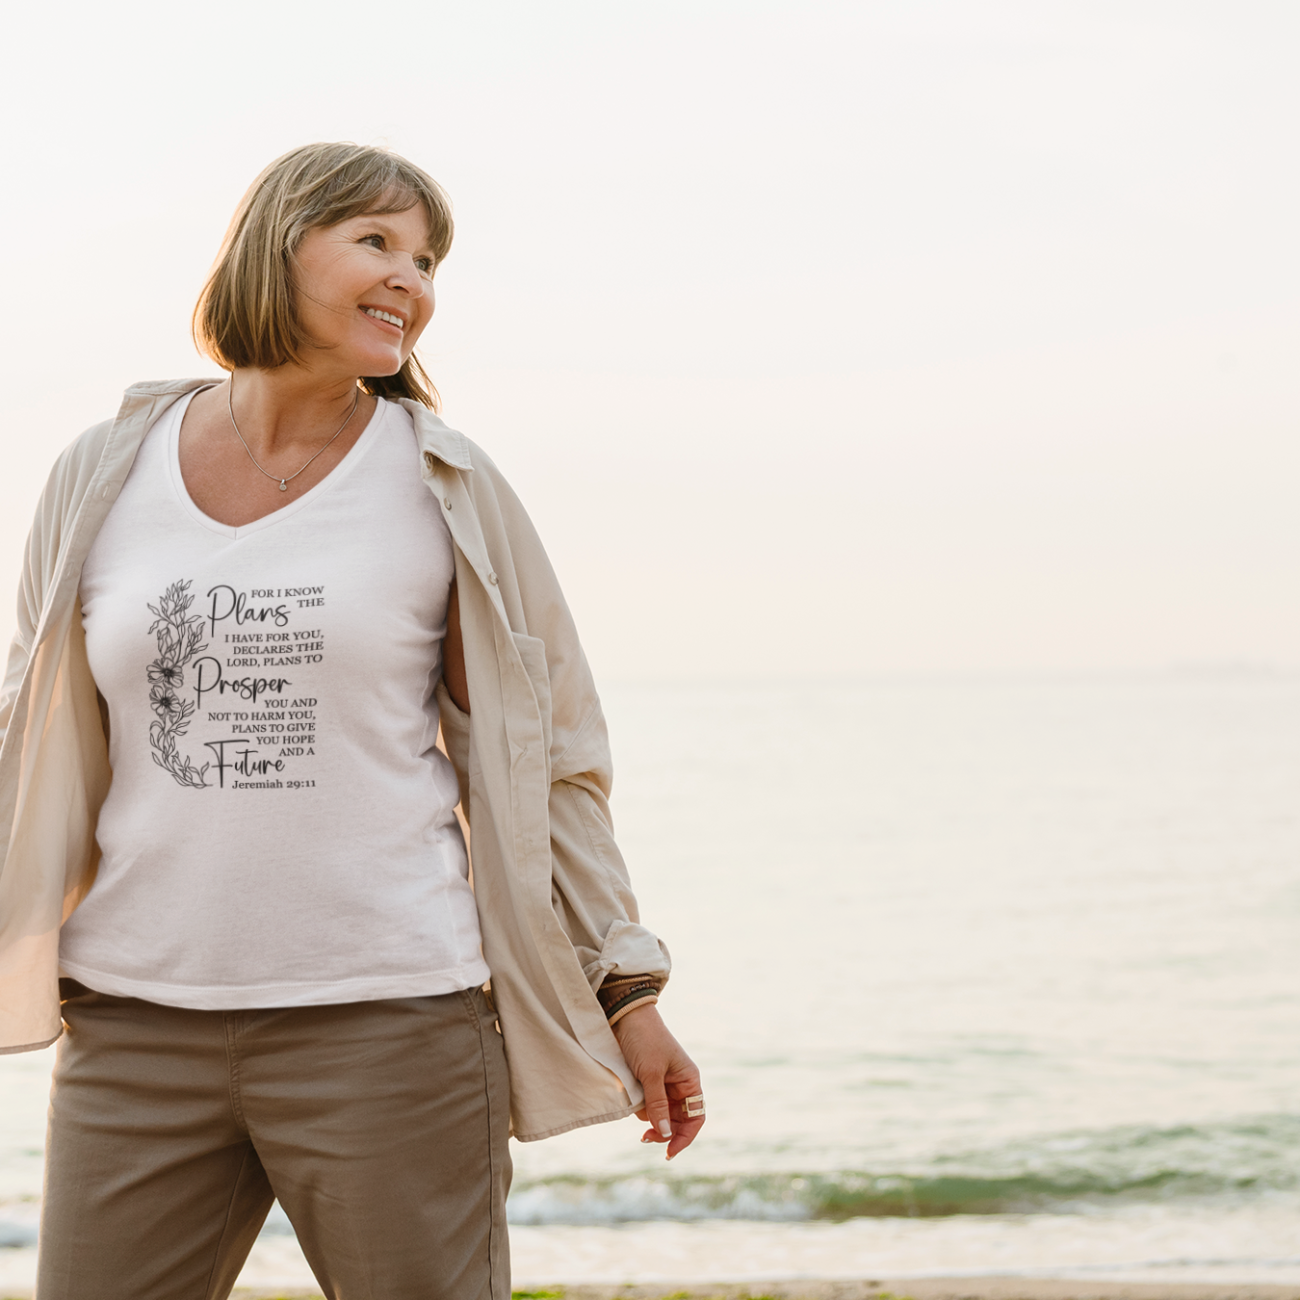 mockup-of-a-senior-woman-posing-with-a-v-neck-t-shirt-on-the-beach-m28580-r-el2